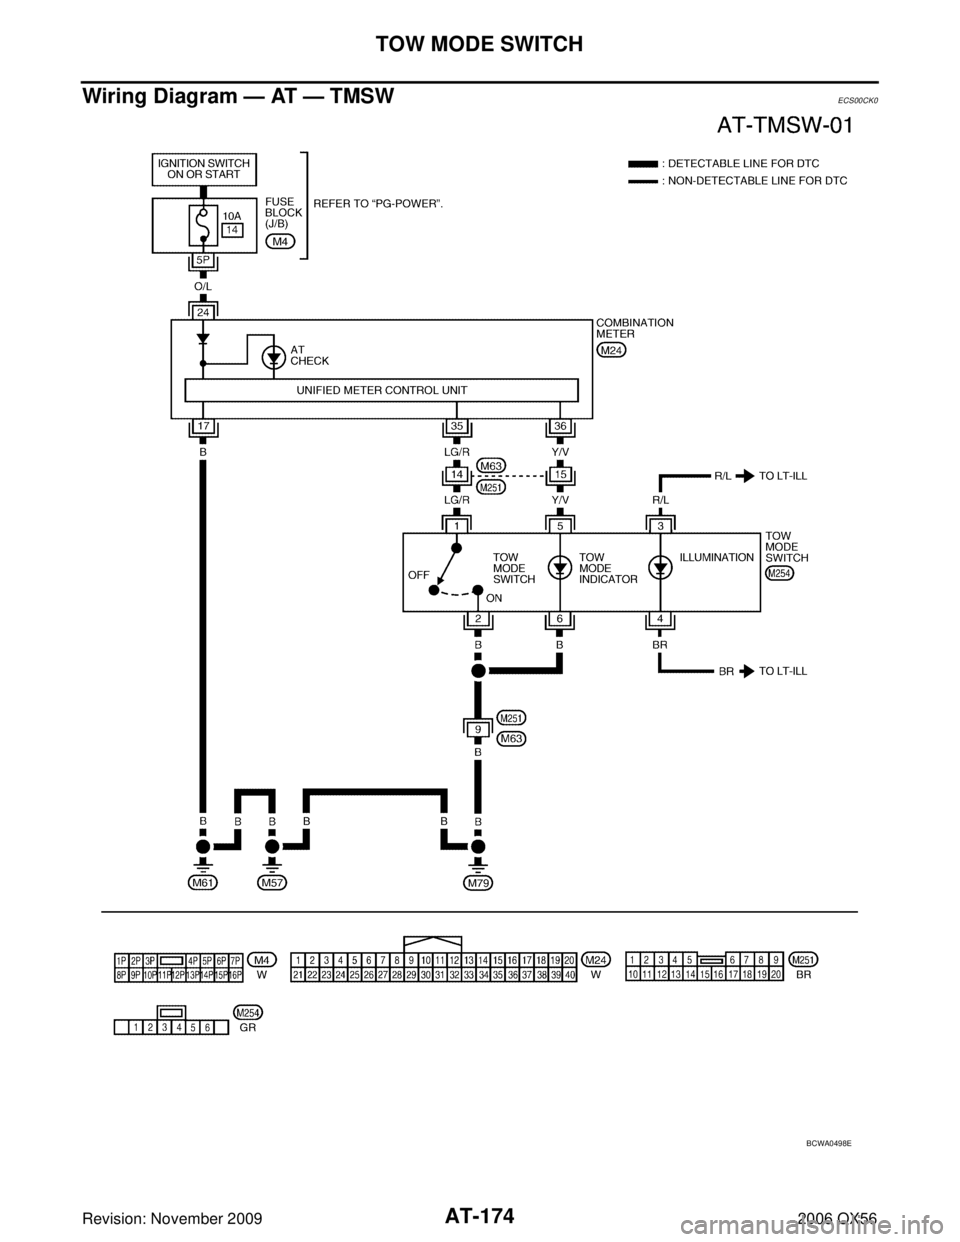 INFINITI QX56 2006  Factory User Guide AT-174
TOW MODE SWITCH
Revision: November 20092006 QX56
Wiring Diagram — AT — TMSWECS00CK0
BCWA0498E 